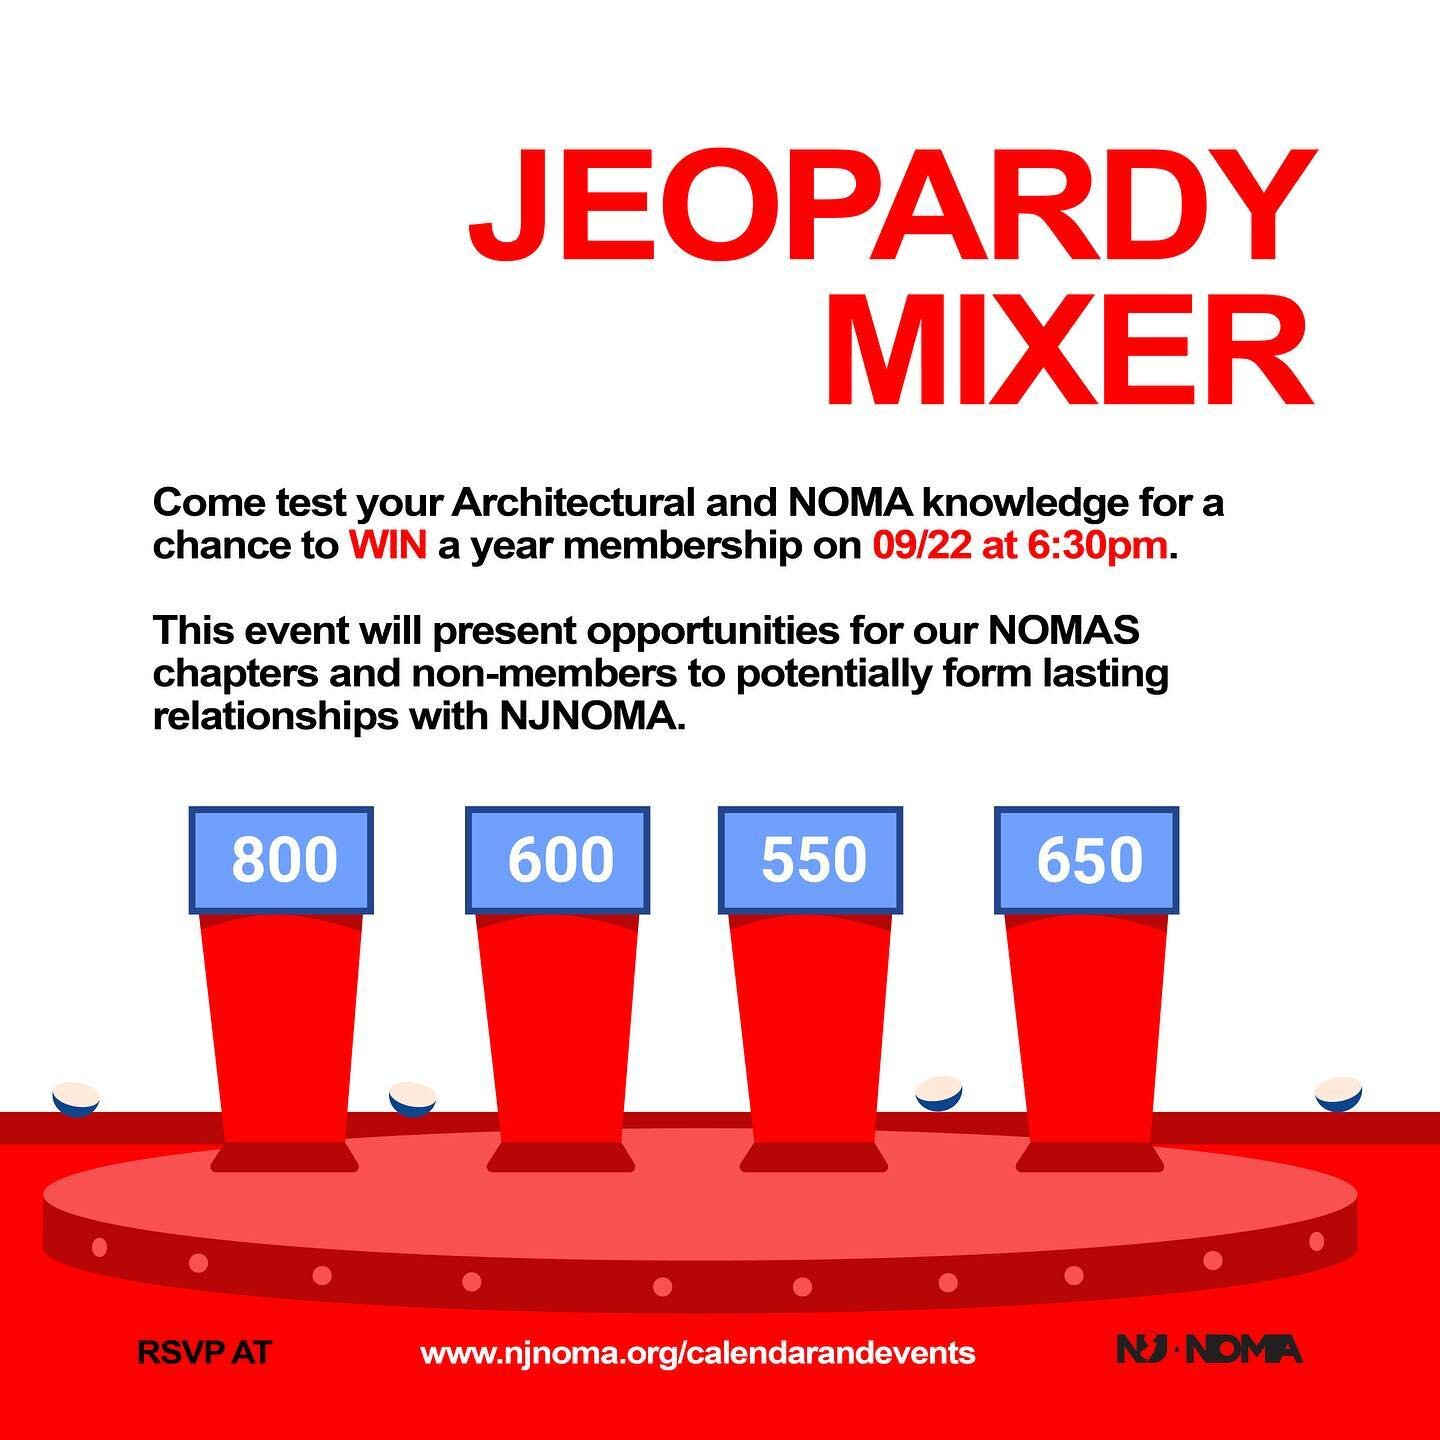 Come test your architectural and NOMA knowledge while networking and getting to know NJNOMA&rsquo;s professional members on 09/22 at 6:30pm...Make sure to RSVP by going to njnoma.org/calendarandevents